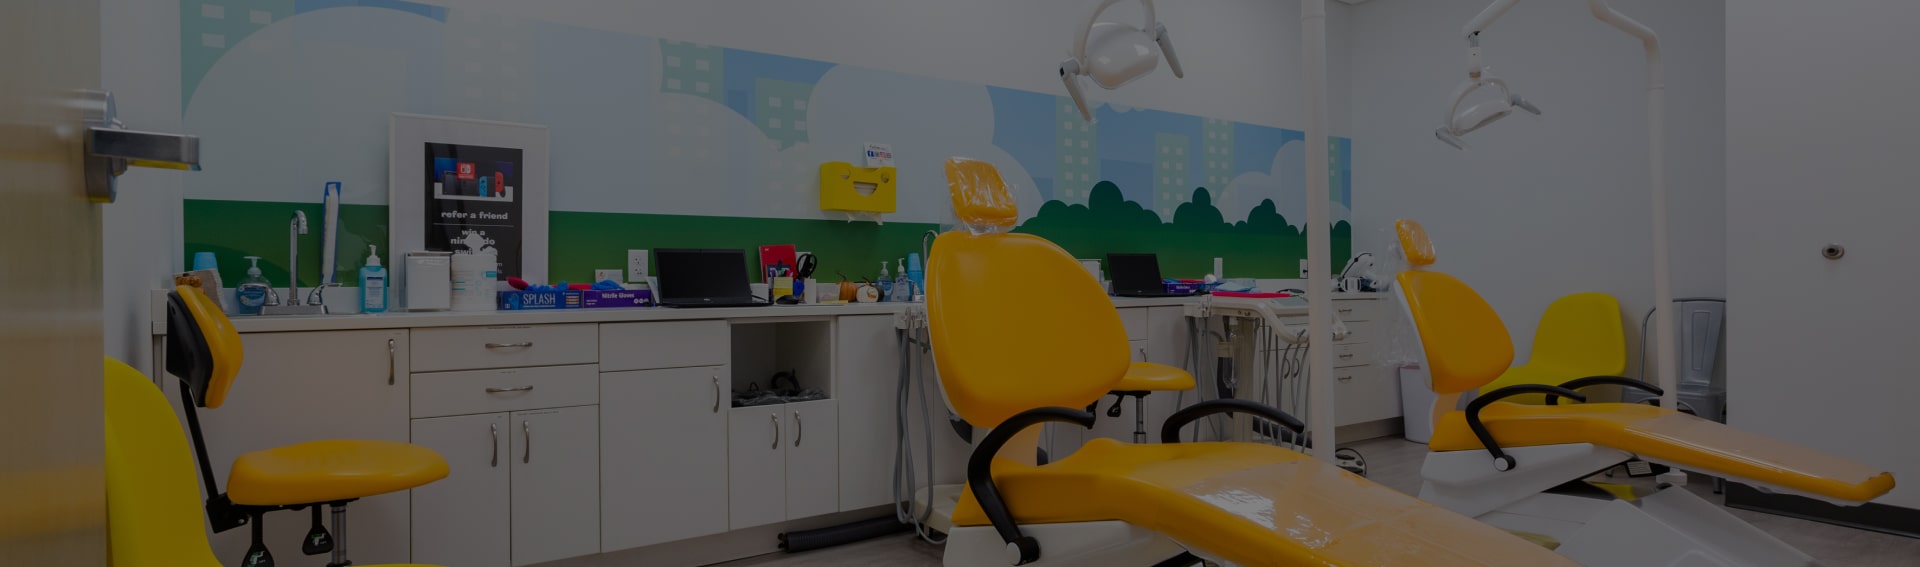 Dentist cabinet with yellow chairs